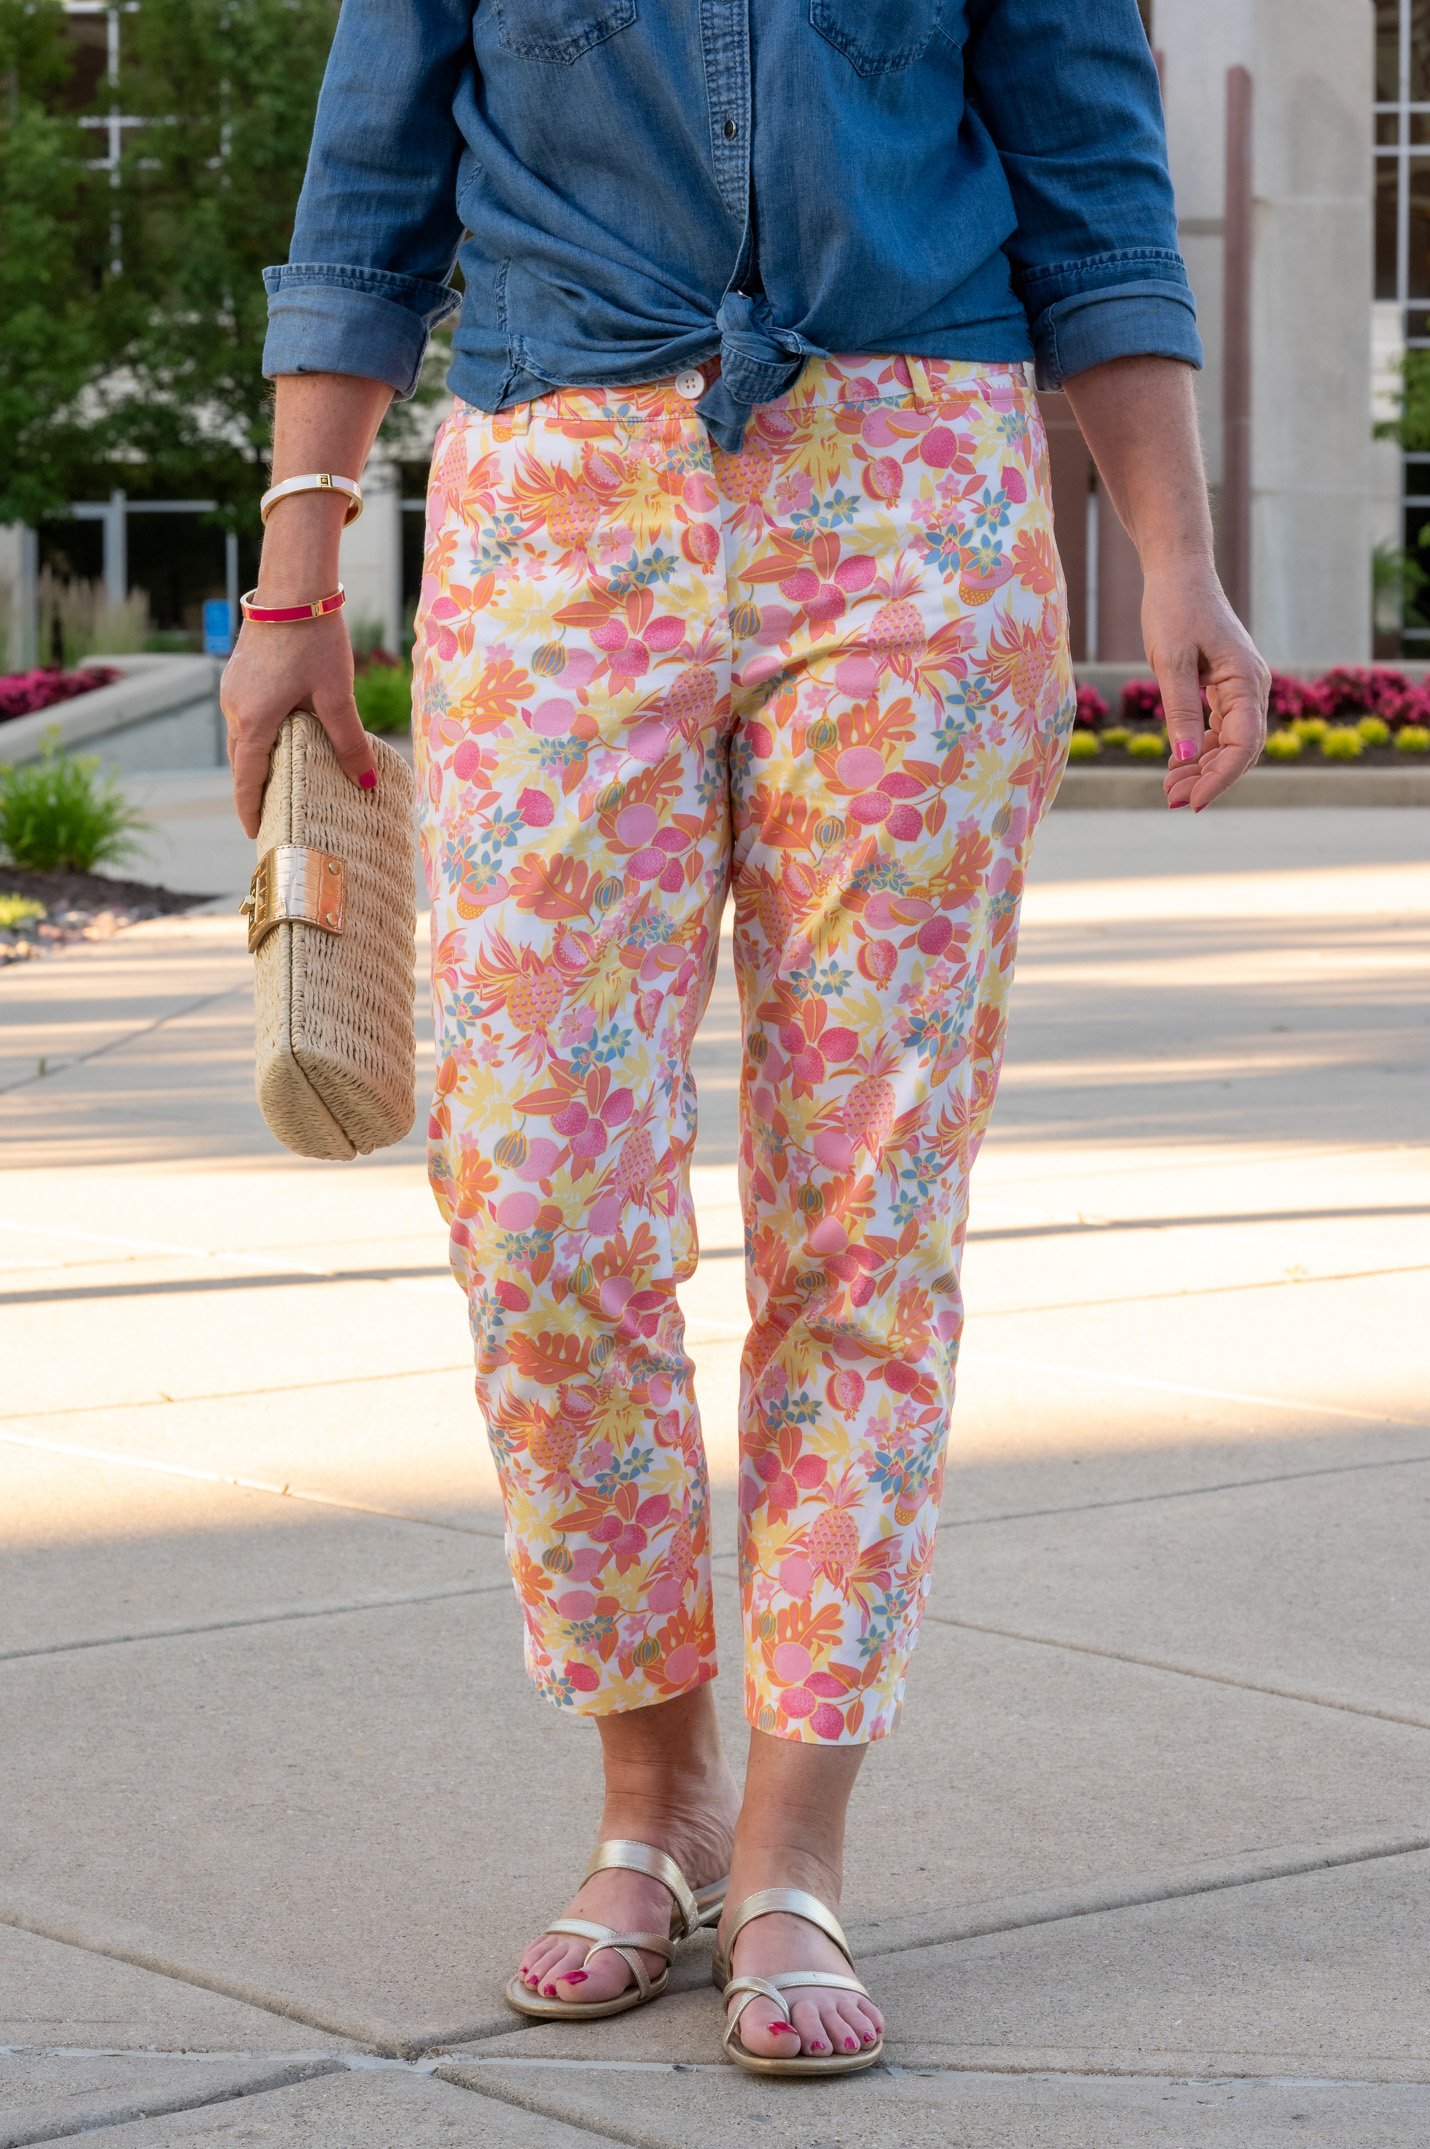 A 70's Inspired Outfit: Floral Blouse + Wide Leg Denim - Jeans and a Teacup